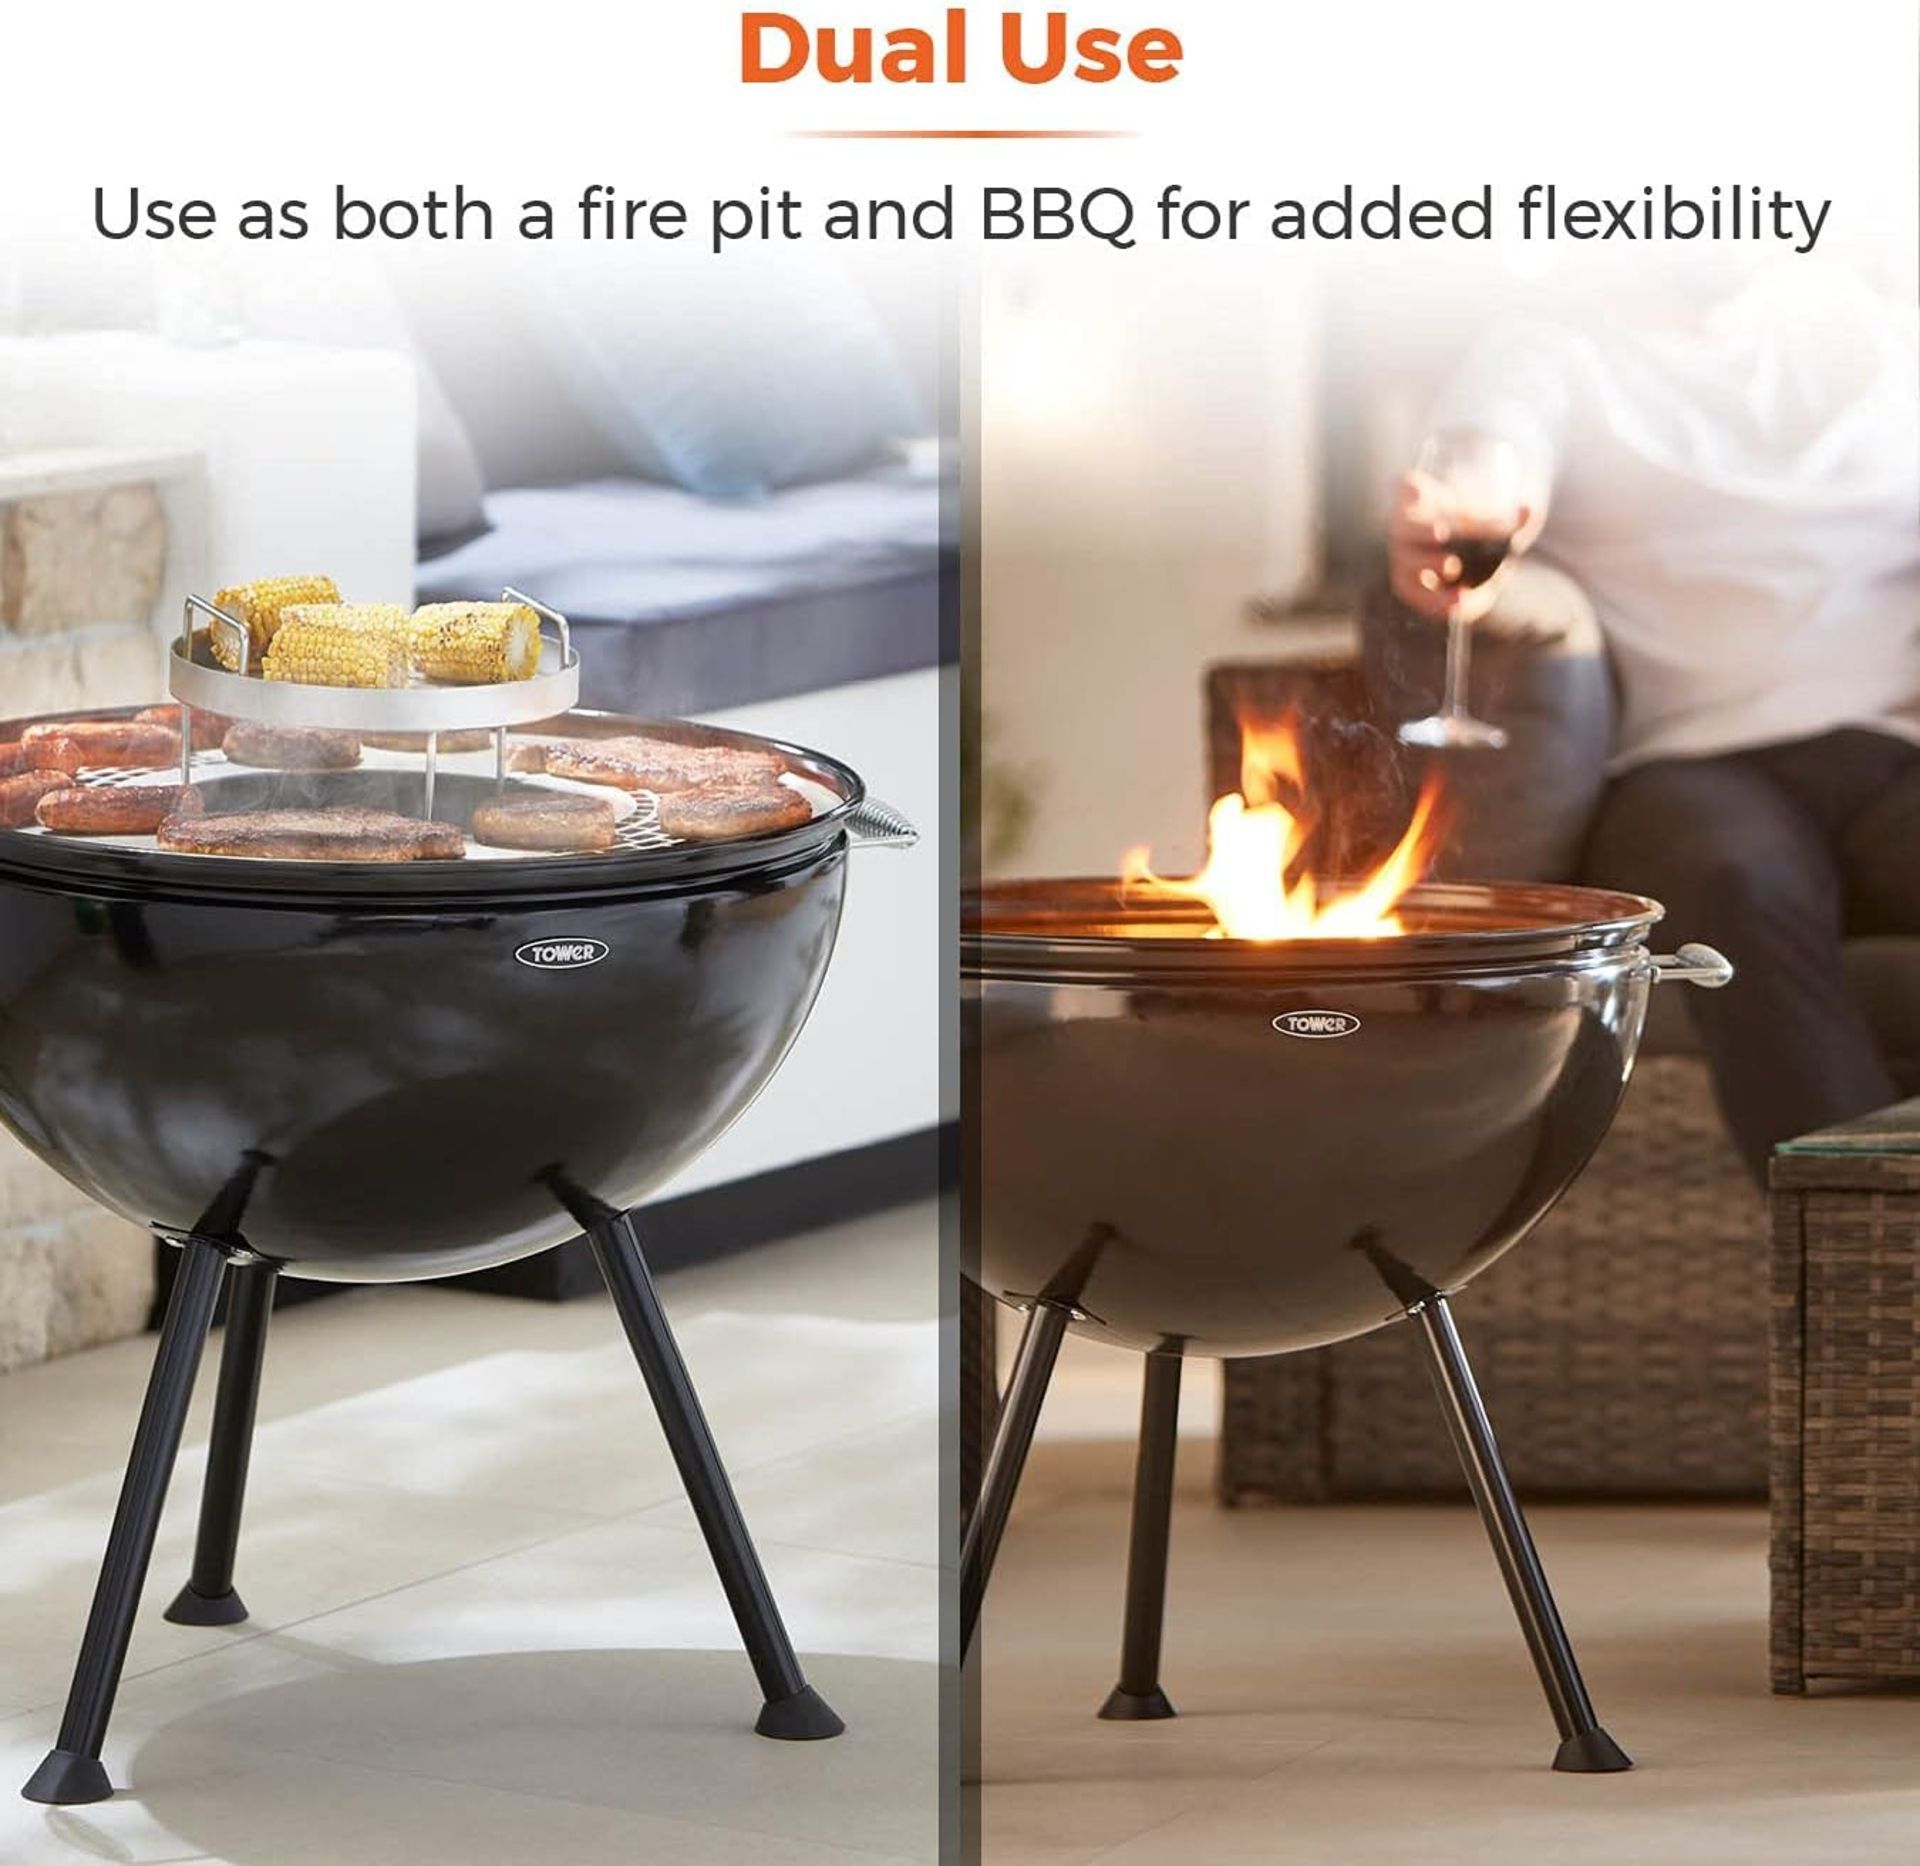 Brand New Tower Sphere Fire Pit and BBQ Grill, Black, DUAL USE â€“ This multi-functional pit n grill - Image 4 of 6